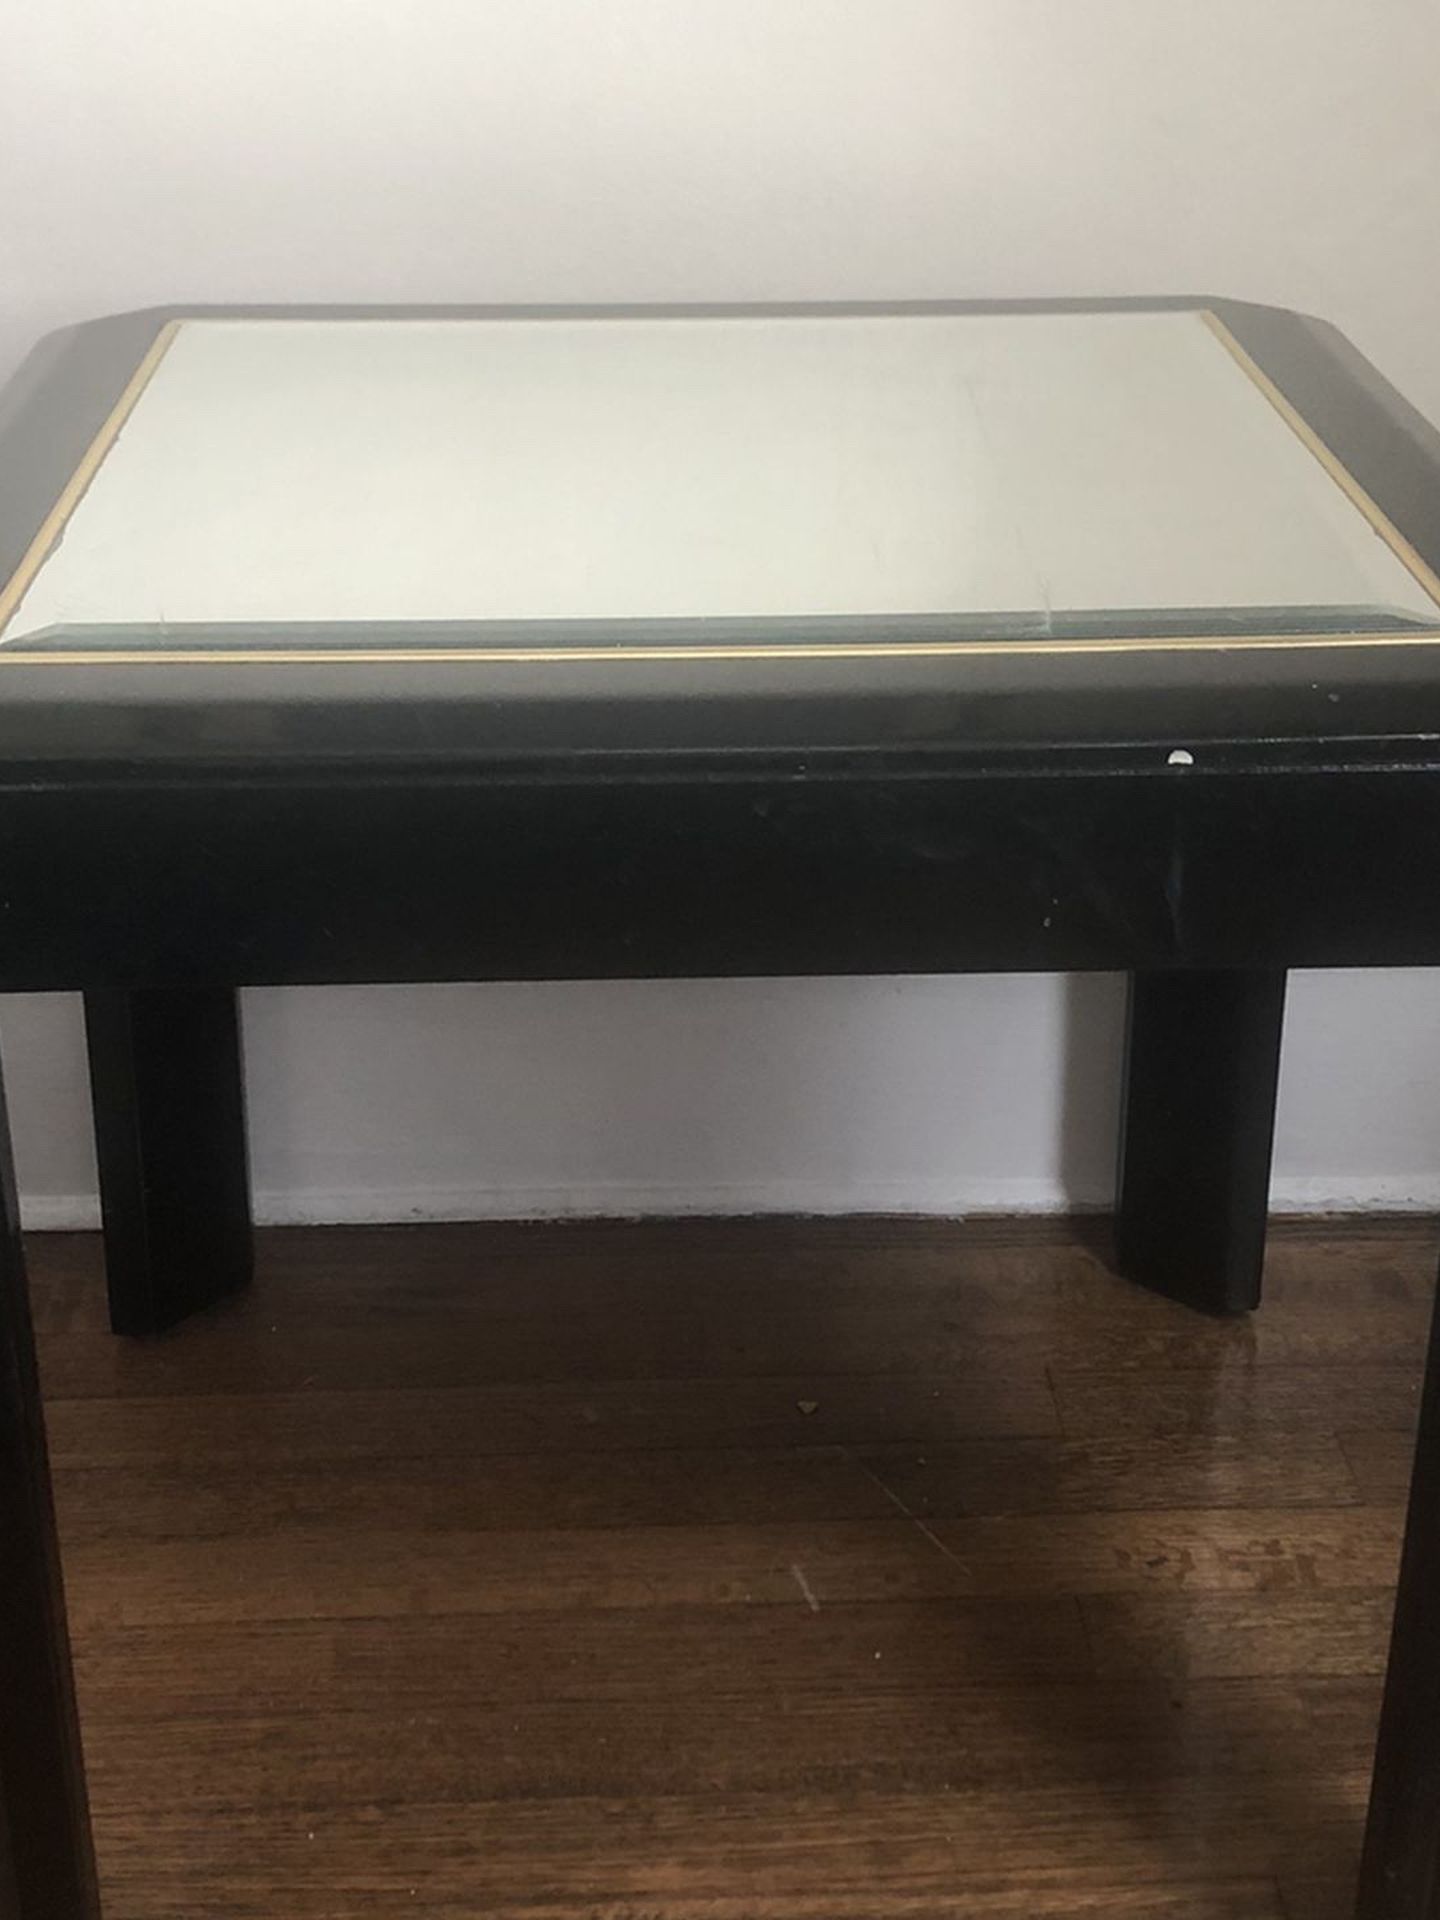 Not sold! Two black tables with glass tops.